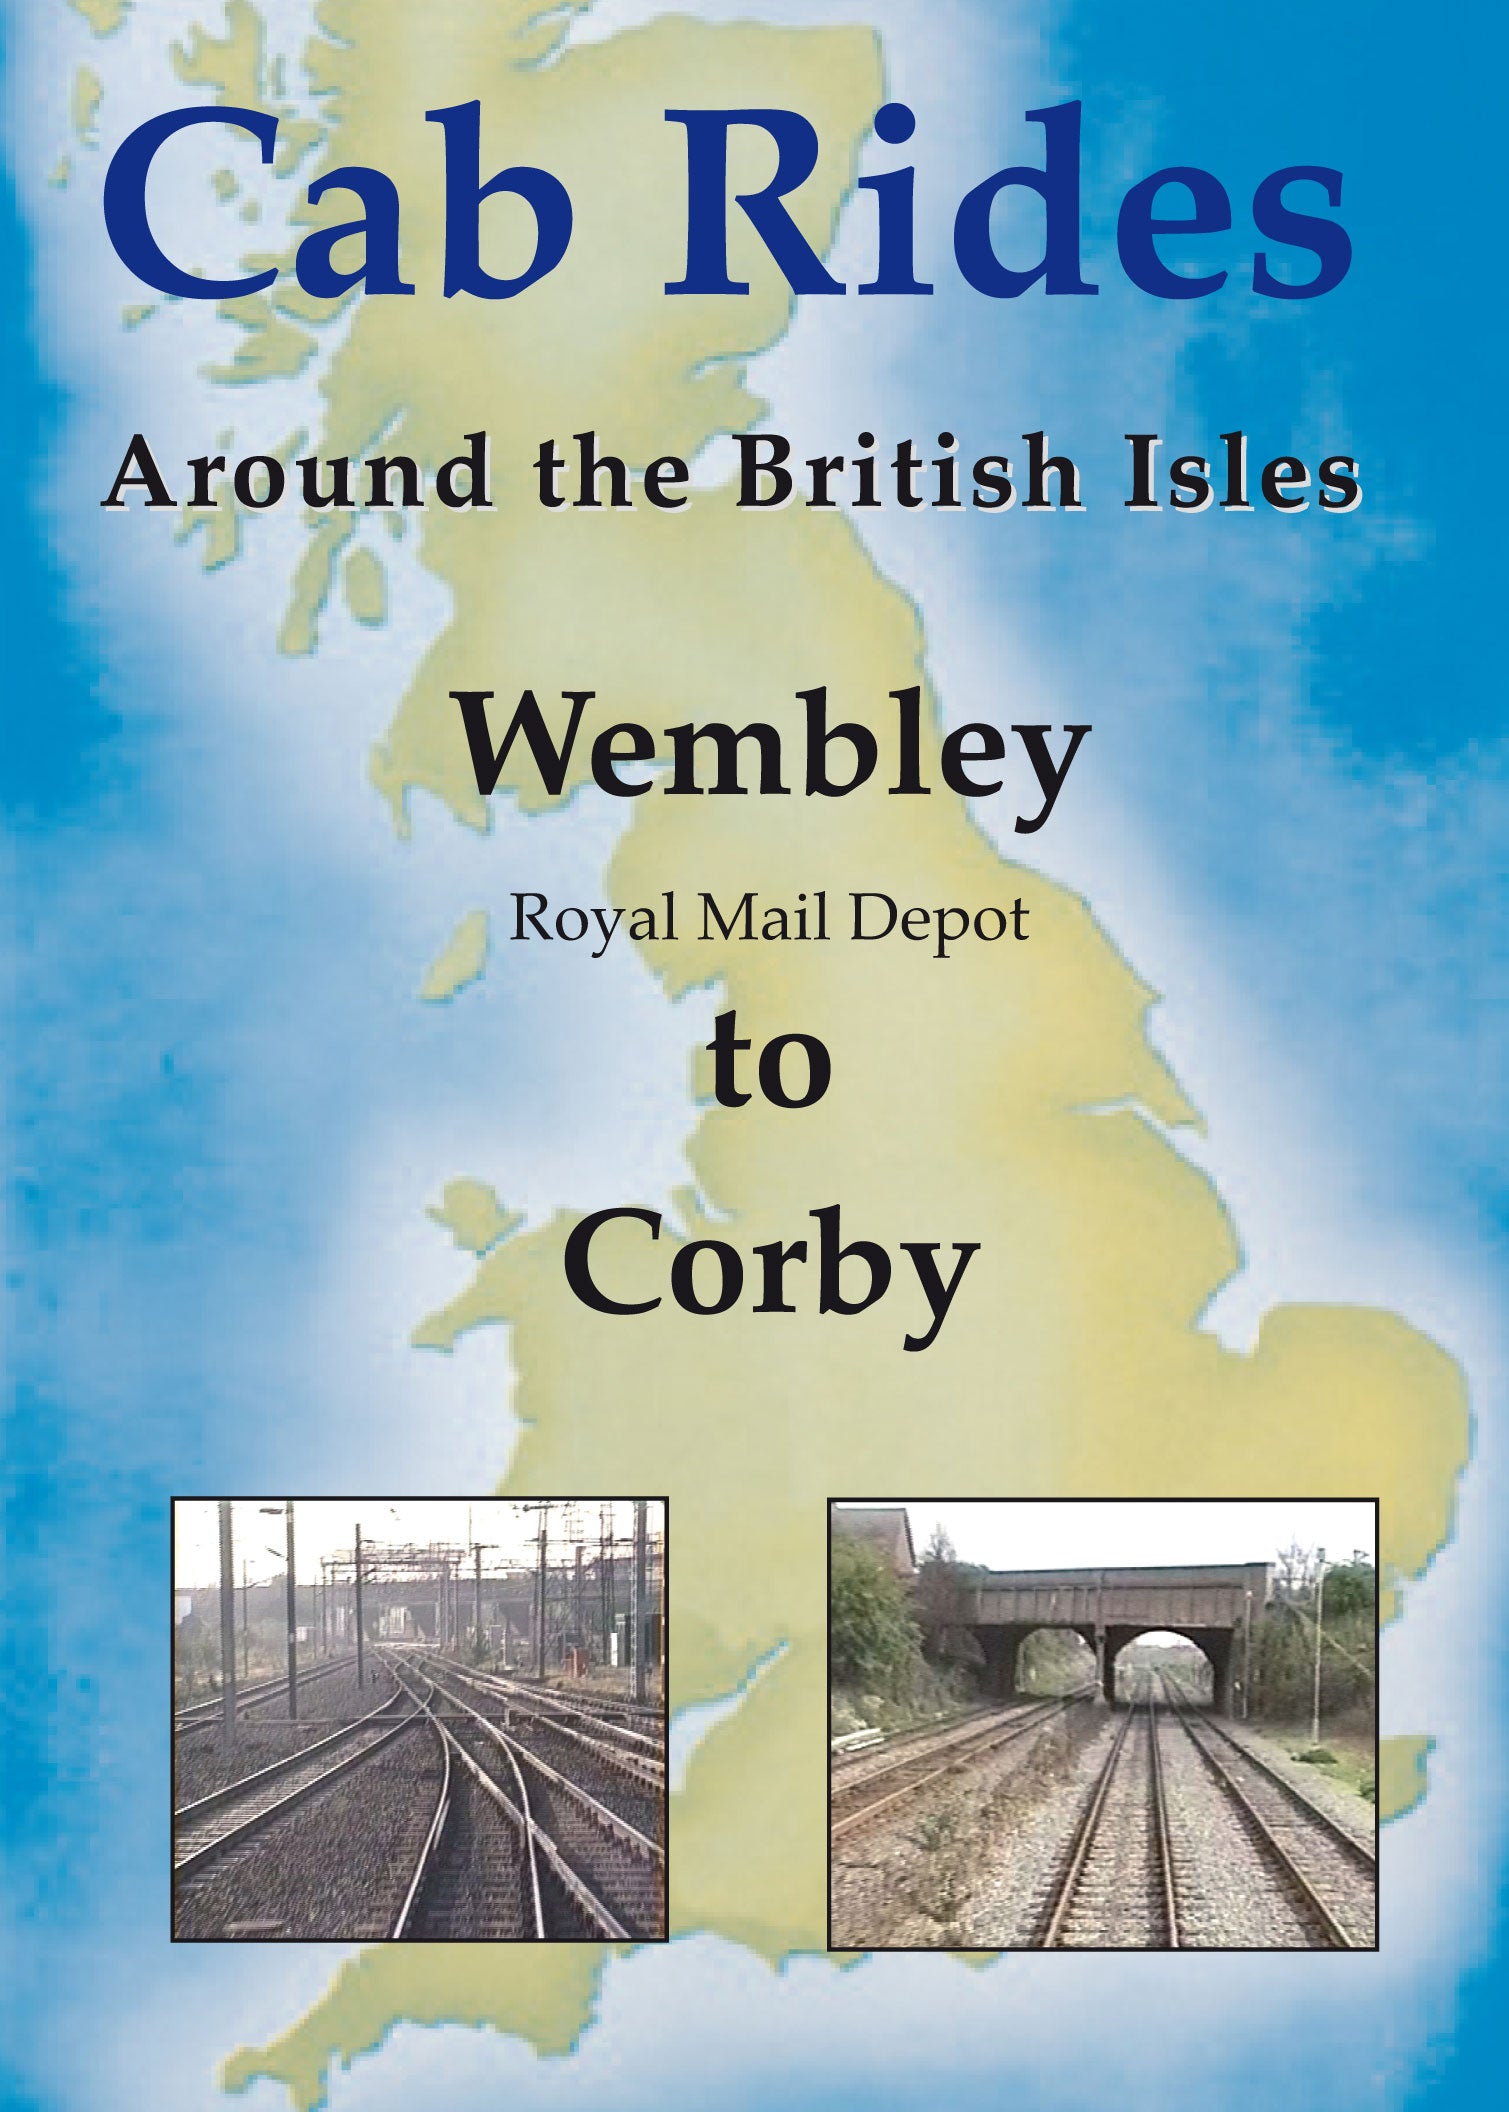 DVD Wembley to Corby Cab Ride